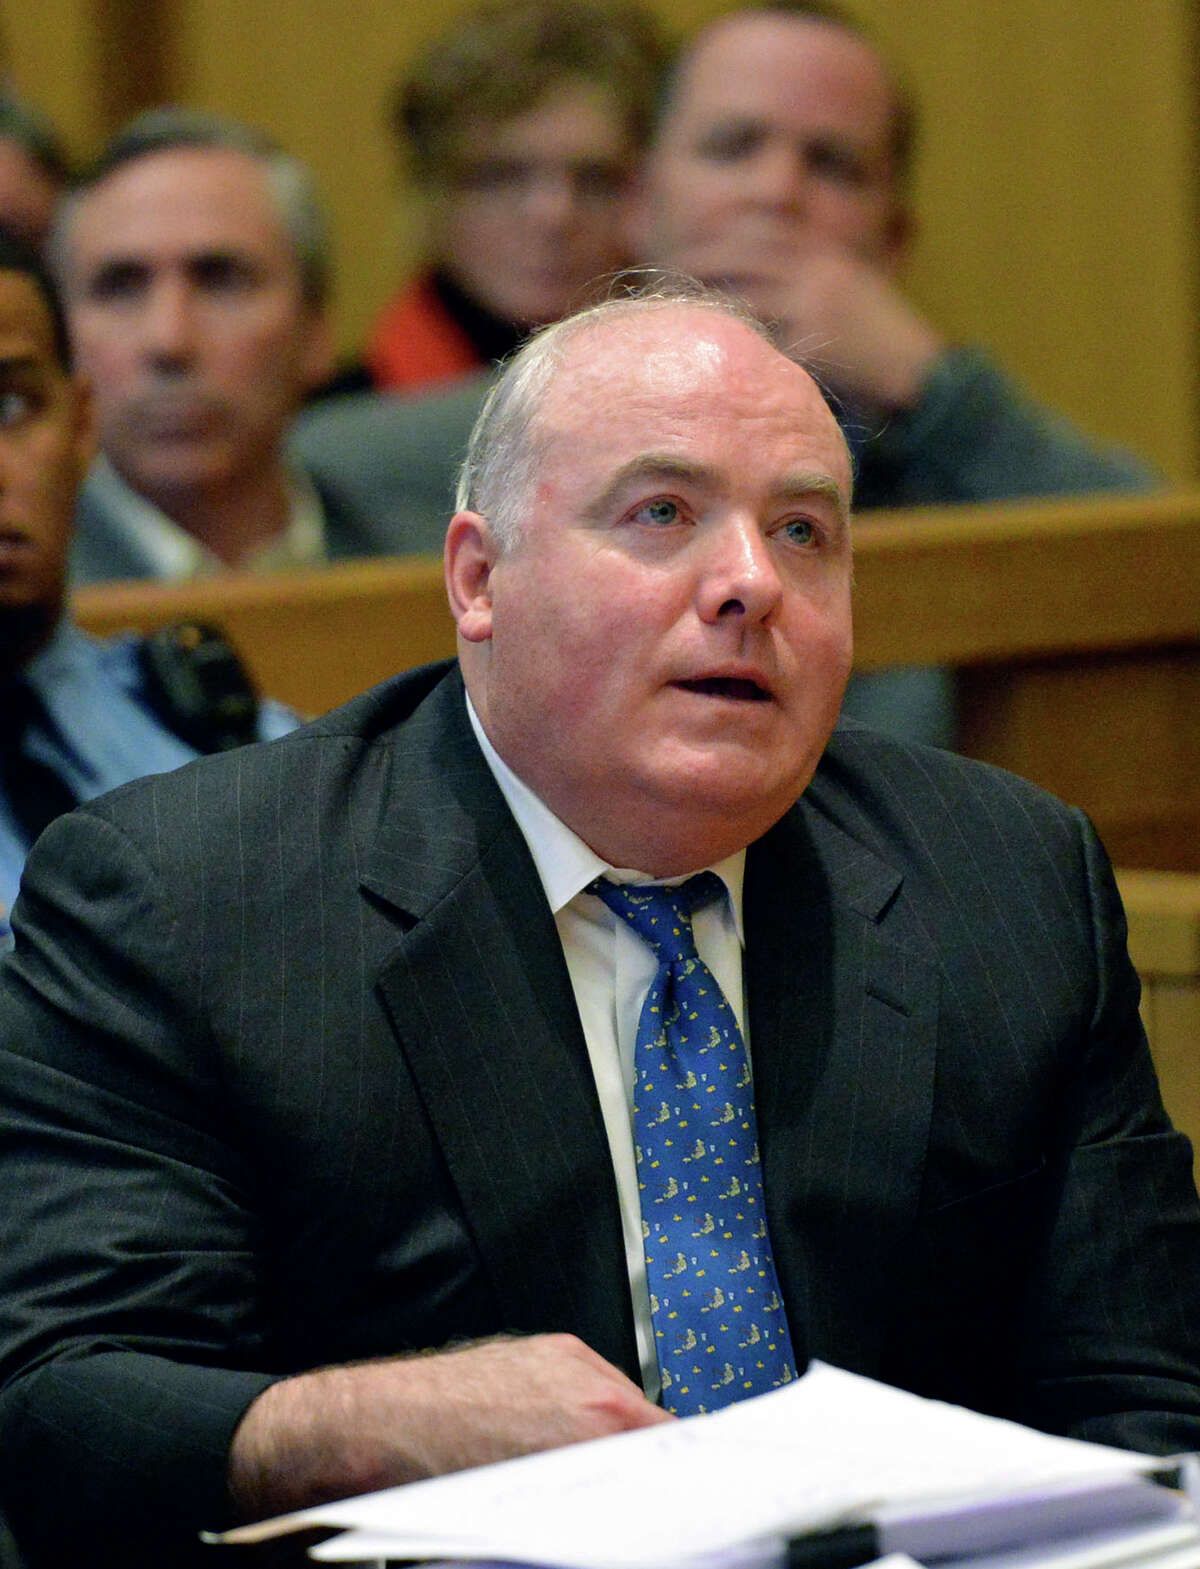 In this Nov. 21, 201,3 photo, Michael Skakel reacts to being granted bail during his bond hearing at state Superior Court in Stamford. Skakel was convicted in 2002 of the October 1975 murder of Martha Moxley, but a judge granted a new trial in 2013.